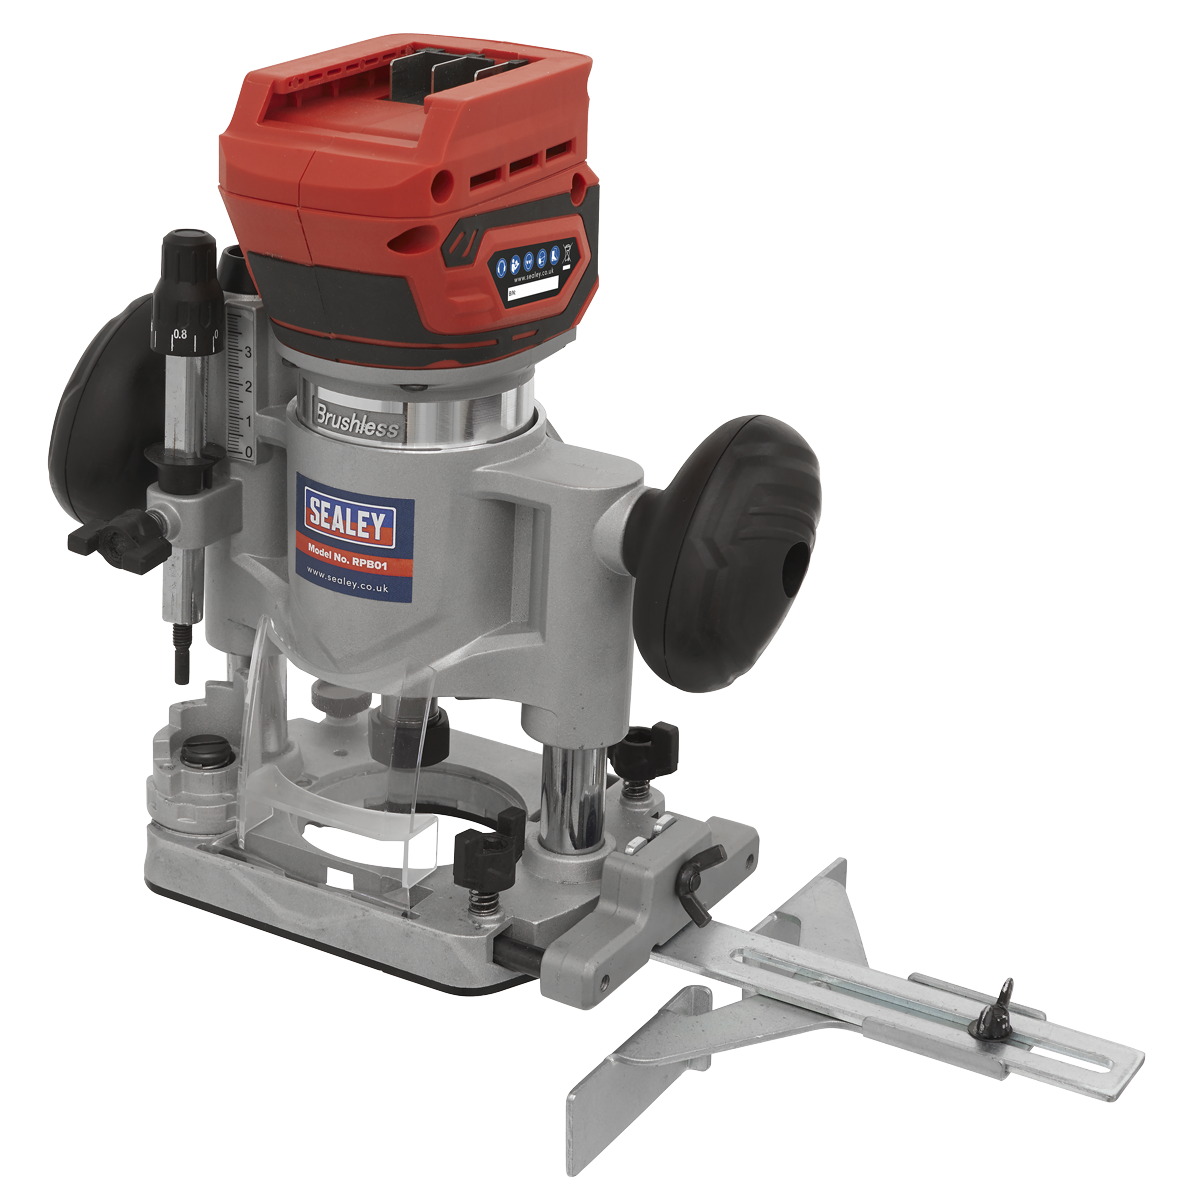 Sealey cordless brushless router